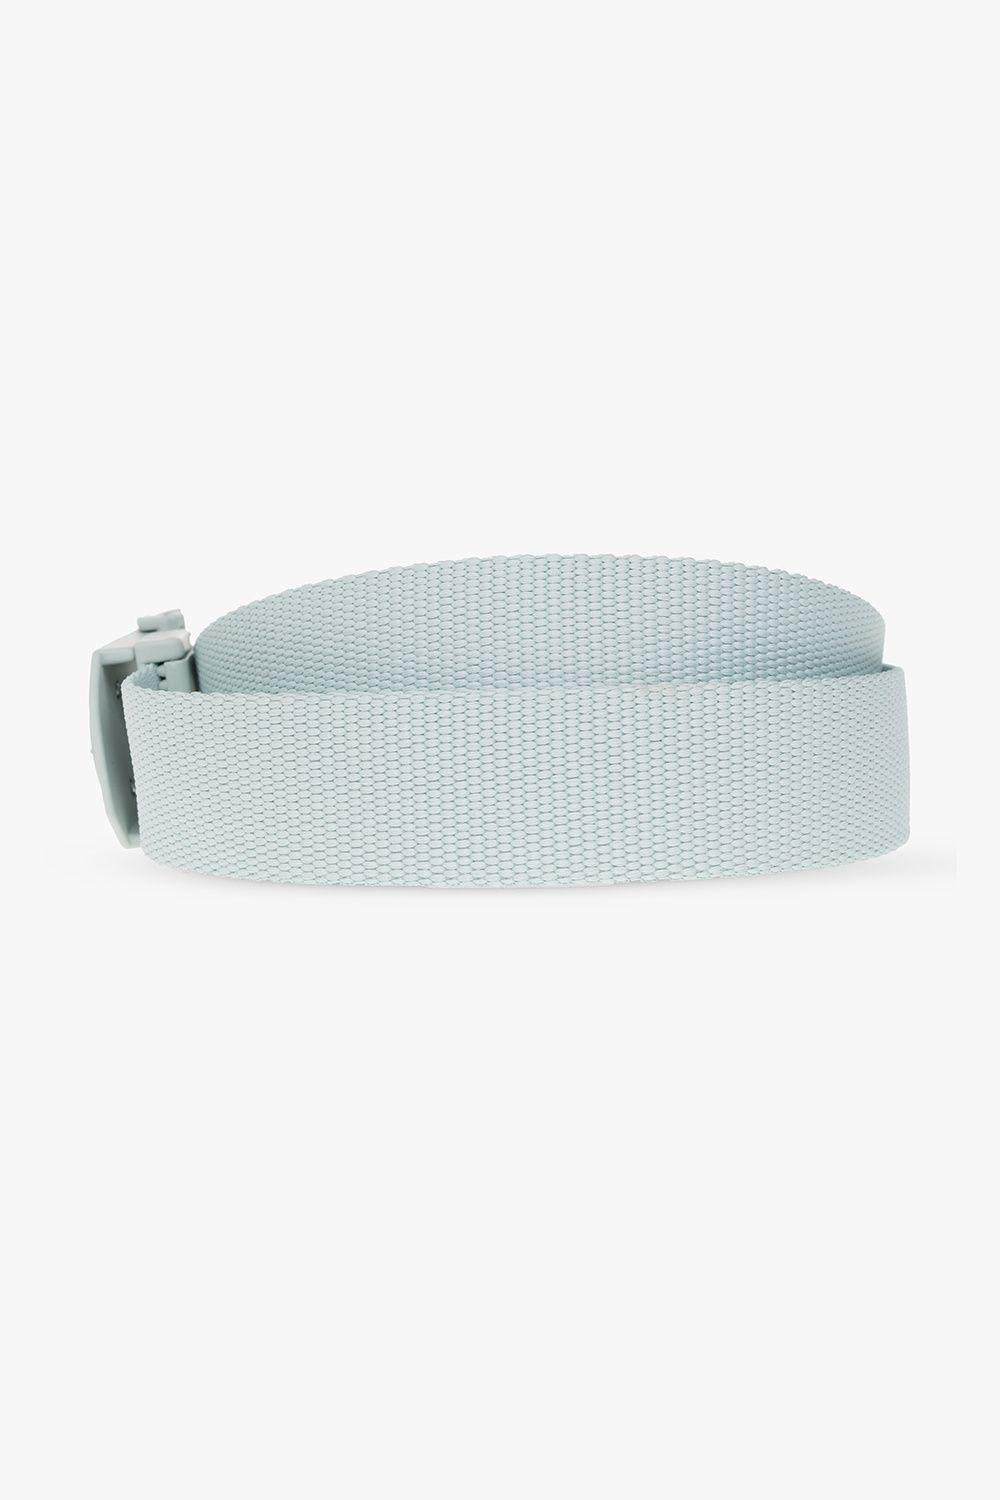 Stone Island Belt With Logo in Blue for Men | Lyst